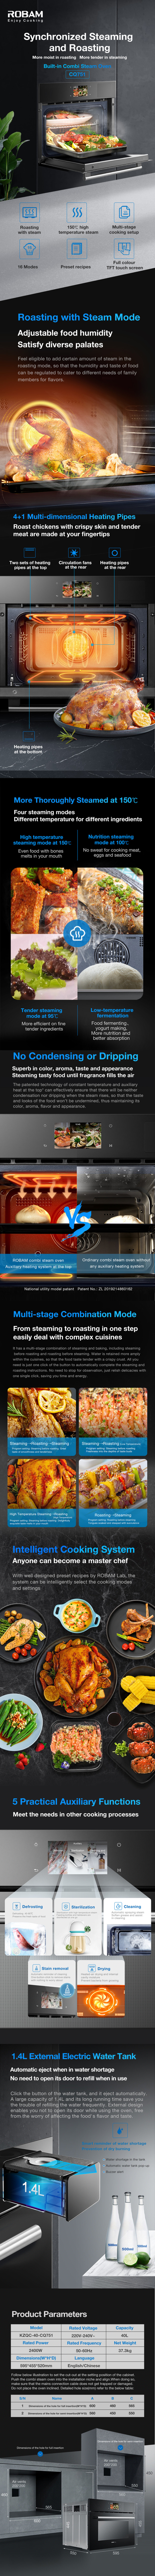 Roasting with steam mode,can adjustable food humidity.Feel eligible to add certain amount of steam in the roasting mode, so that the humidity and taste of food can be regulated to cater to different needs of family members for flavors<br />
4 steaming modes,different temperature for different ingredients.<br />
①High temperature steaming mode at 150℃②Nutrition steaming mode at 100℃③Tender steaming mode at 95℃④Low-temperature fermentation<br />
Multi-stage combination mode<br />
It has a multi-stage combination of steaming and baking, including steaming before roasting and roasting before steaming. All you need is just one click of the button to automatically complete the steaming and roasting instructions.<br />
5 practical auxiliary functions<br />
①Defrosting  40-80°C②Sterilization with high temperature steam③Automatic spraying steam④One-button-click to remove stains with nothing to worry about⑤Heated-air drying and internal cavity moisture